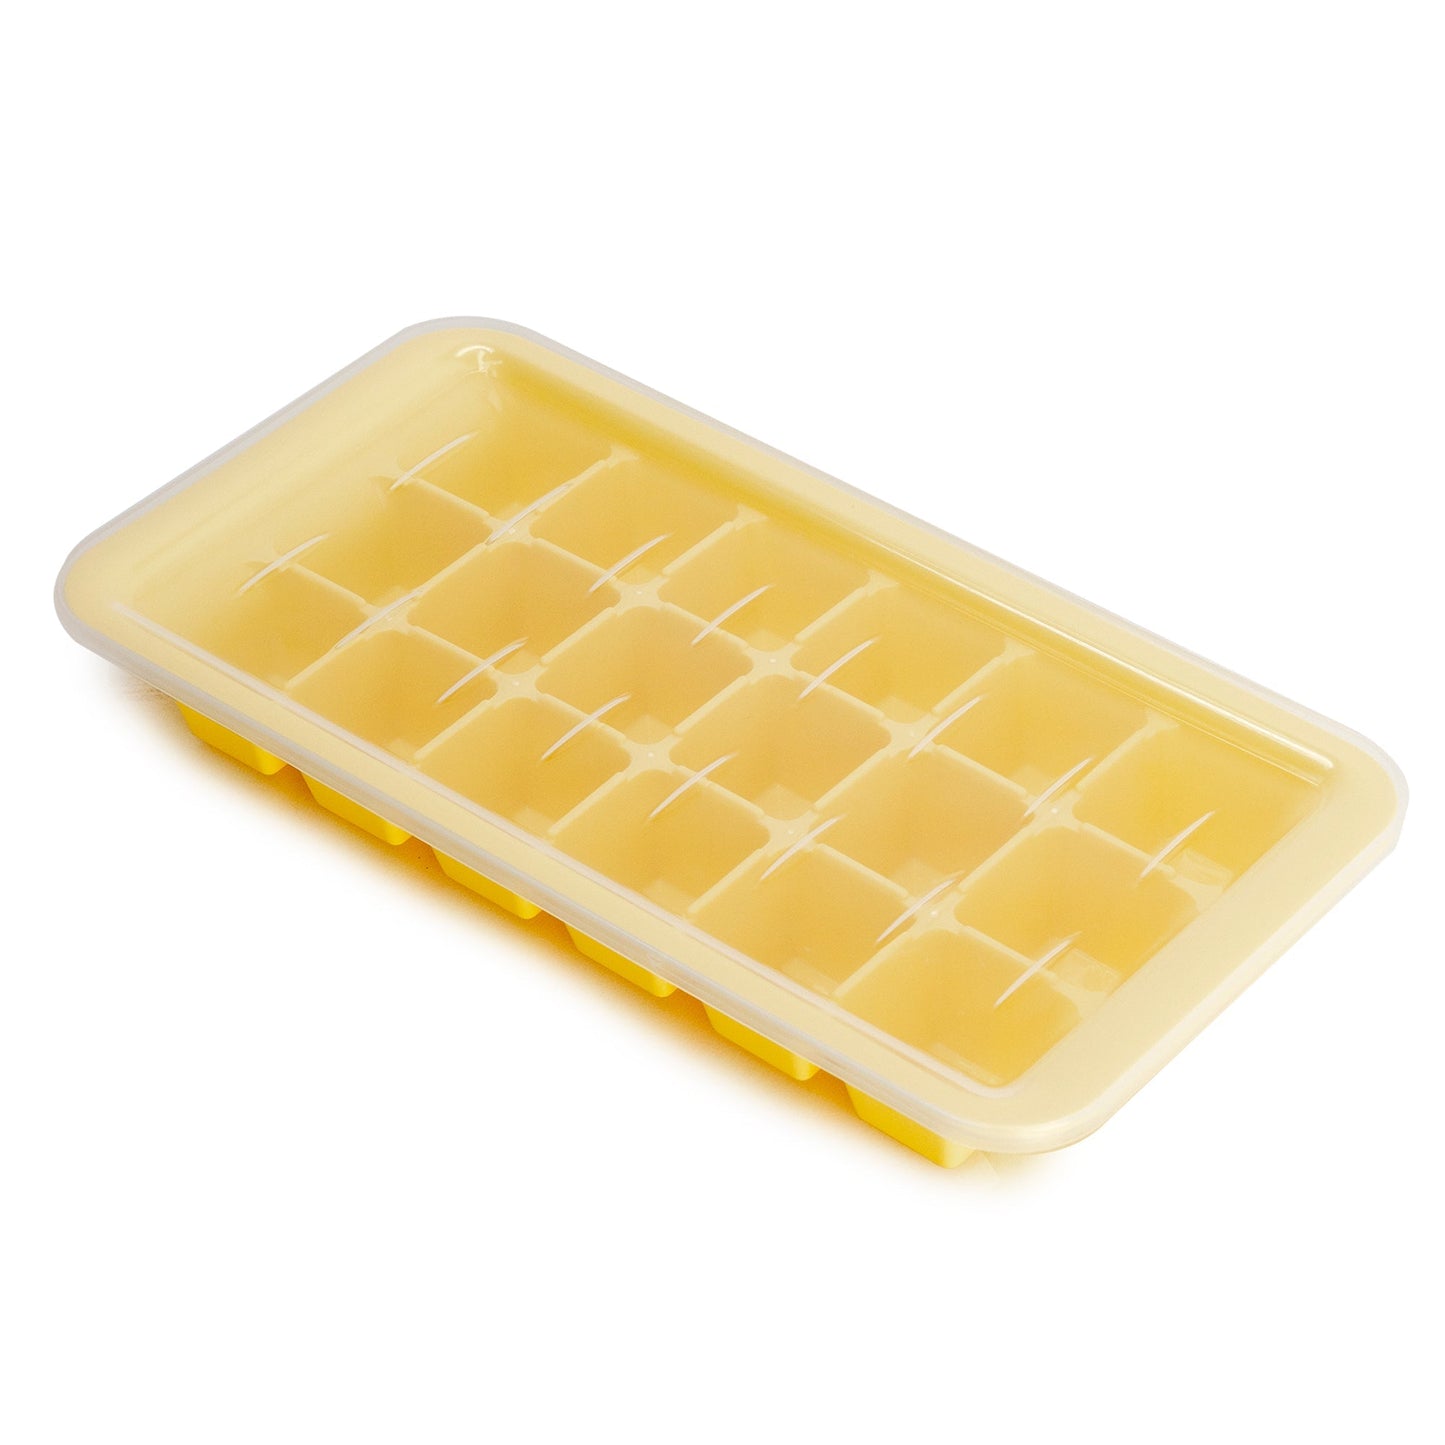 Ice Cube Tray & Cover